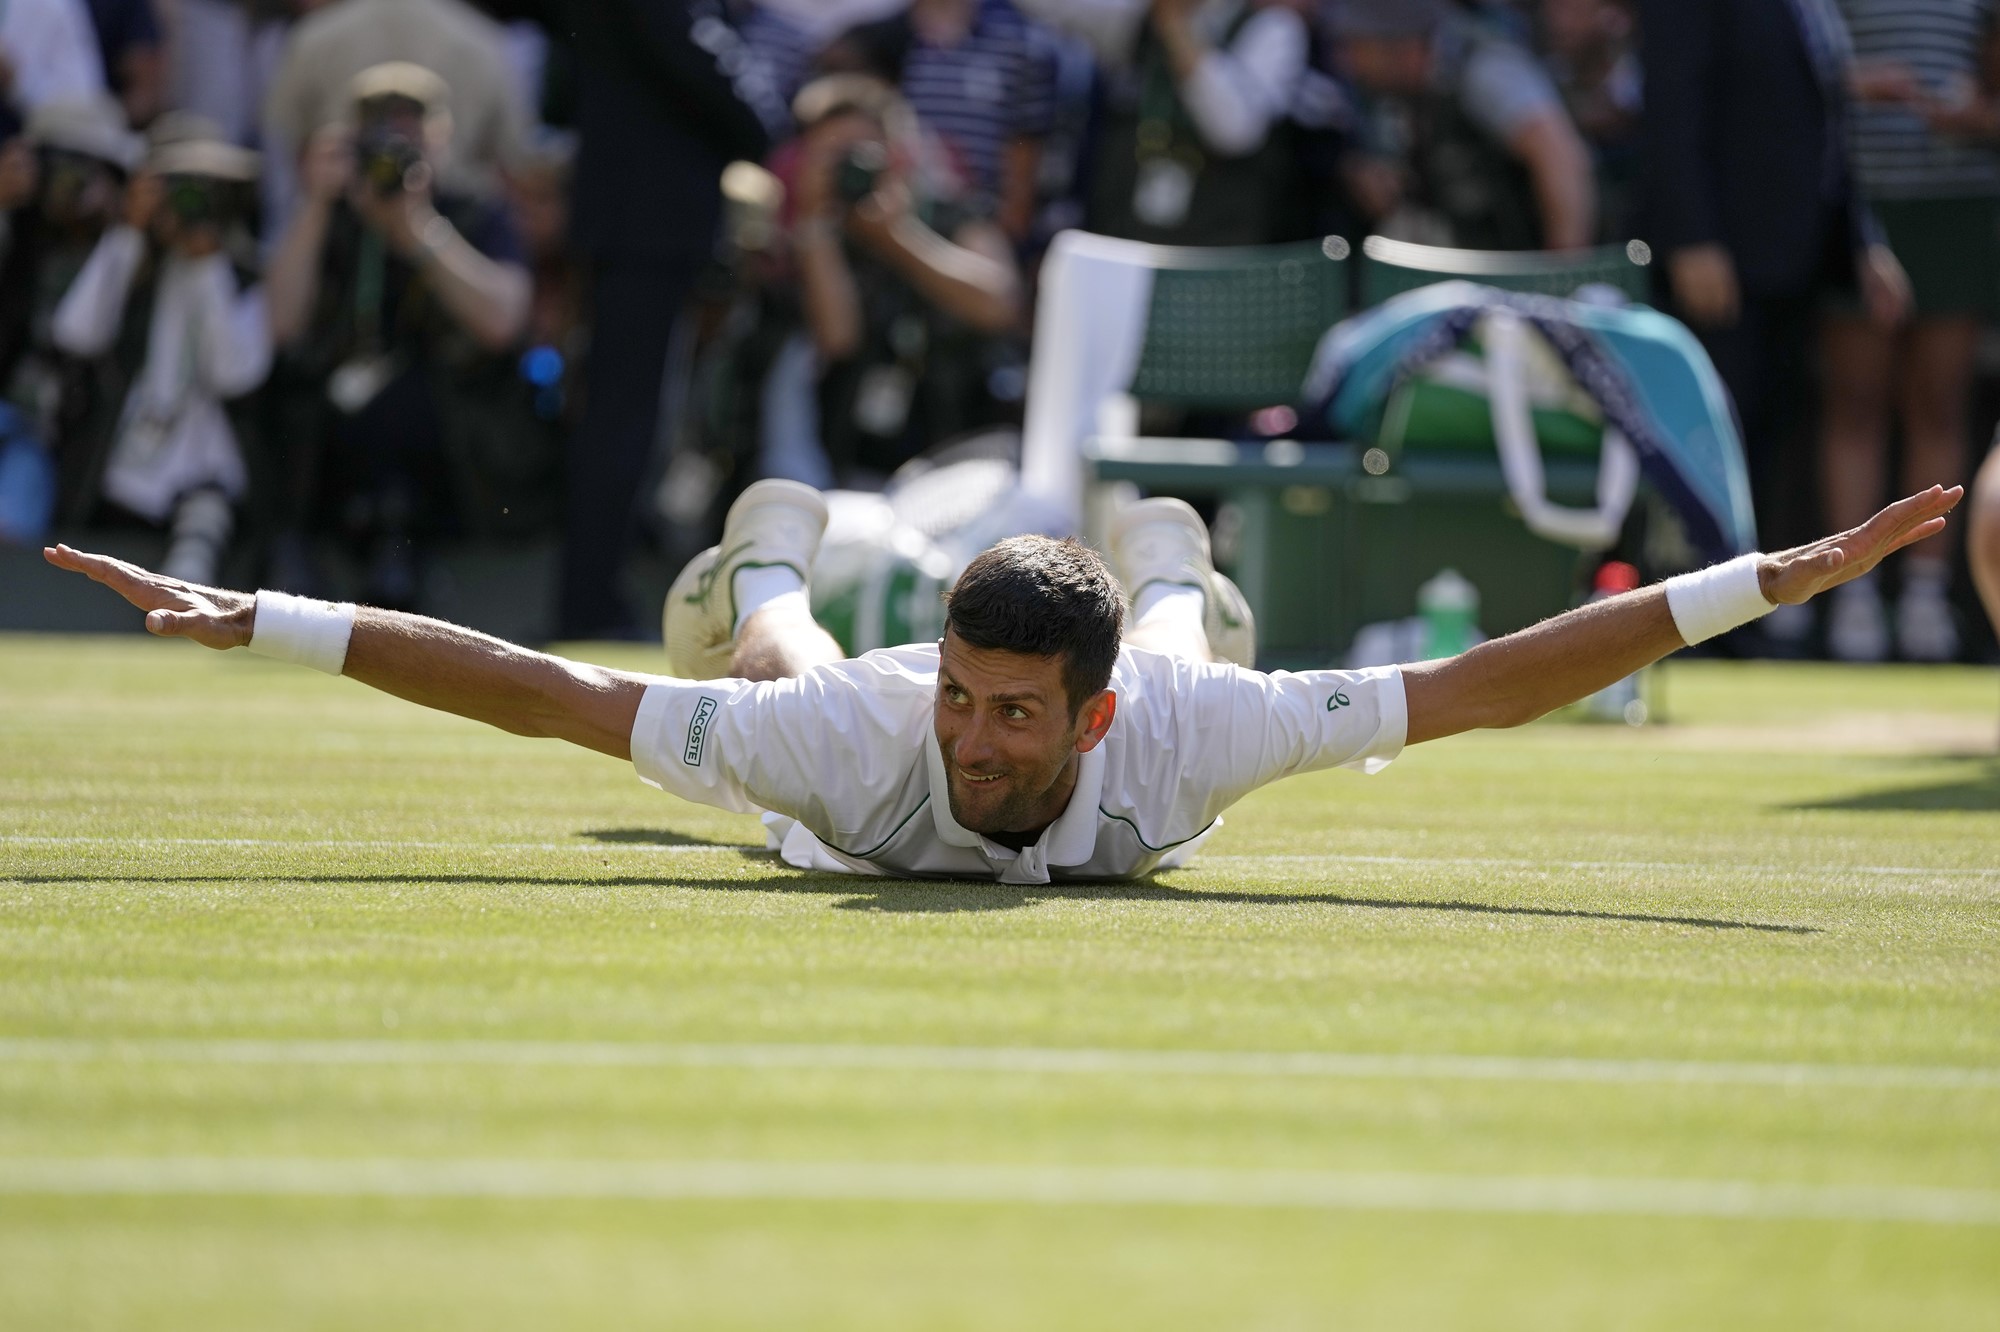 Novak Djokovic lies on his stomach with his arms outstretched after the Wimbledon final.